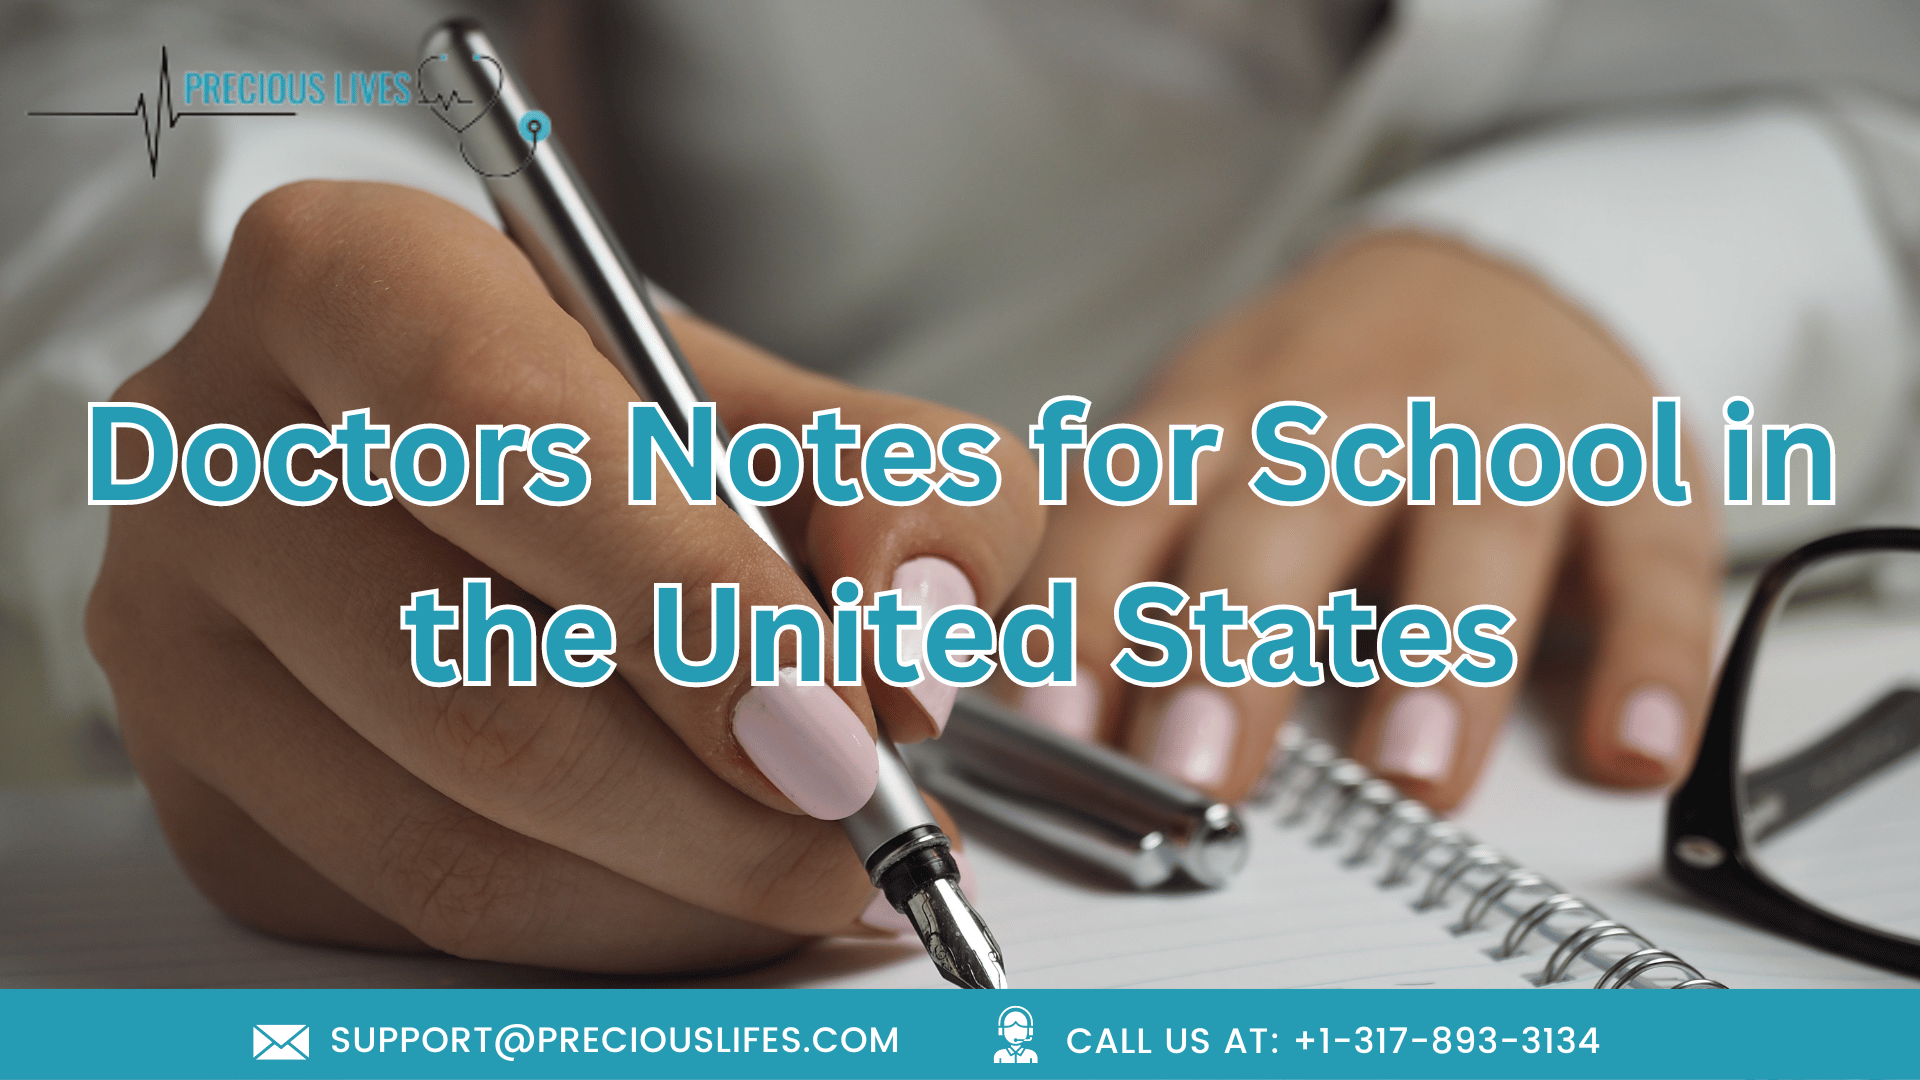 Doctors Notes for School in the United States